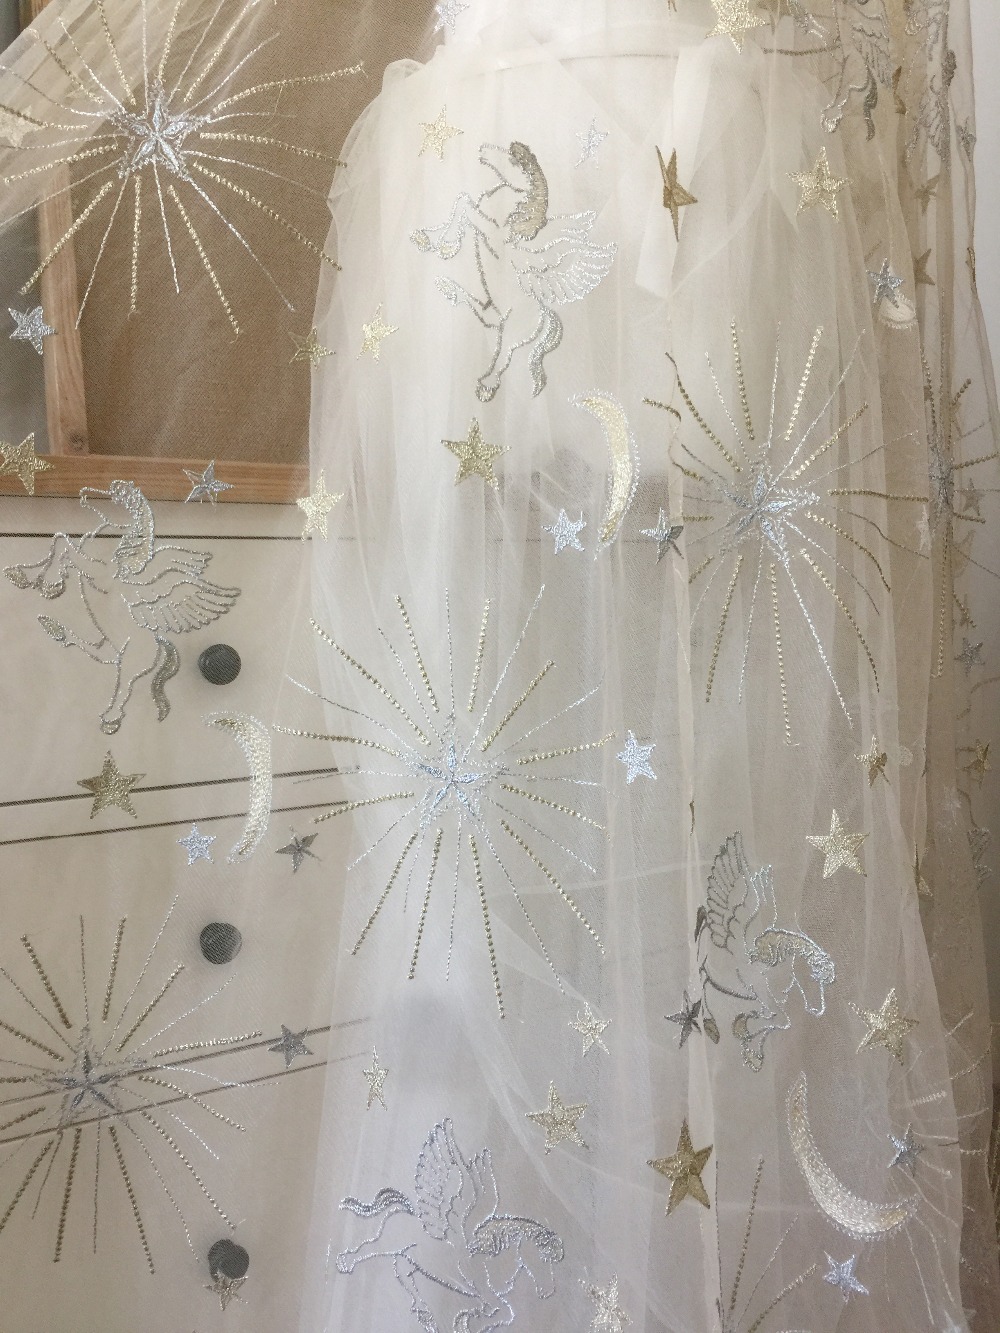 5 yards Soft Tulle Lace Fabric ,Star Horse Floral Embroidery Metallic Bridal Gown Lace Fabric in Champagne 150cm wide